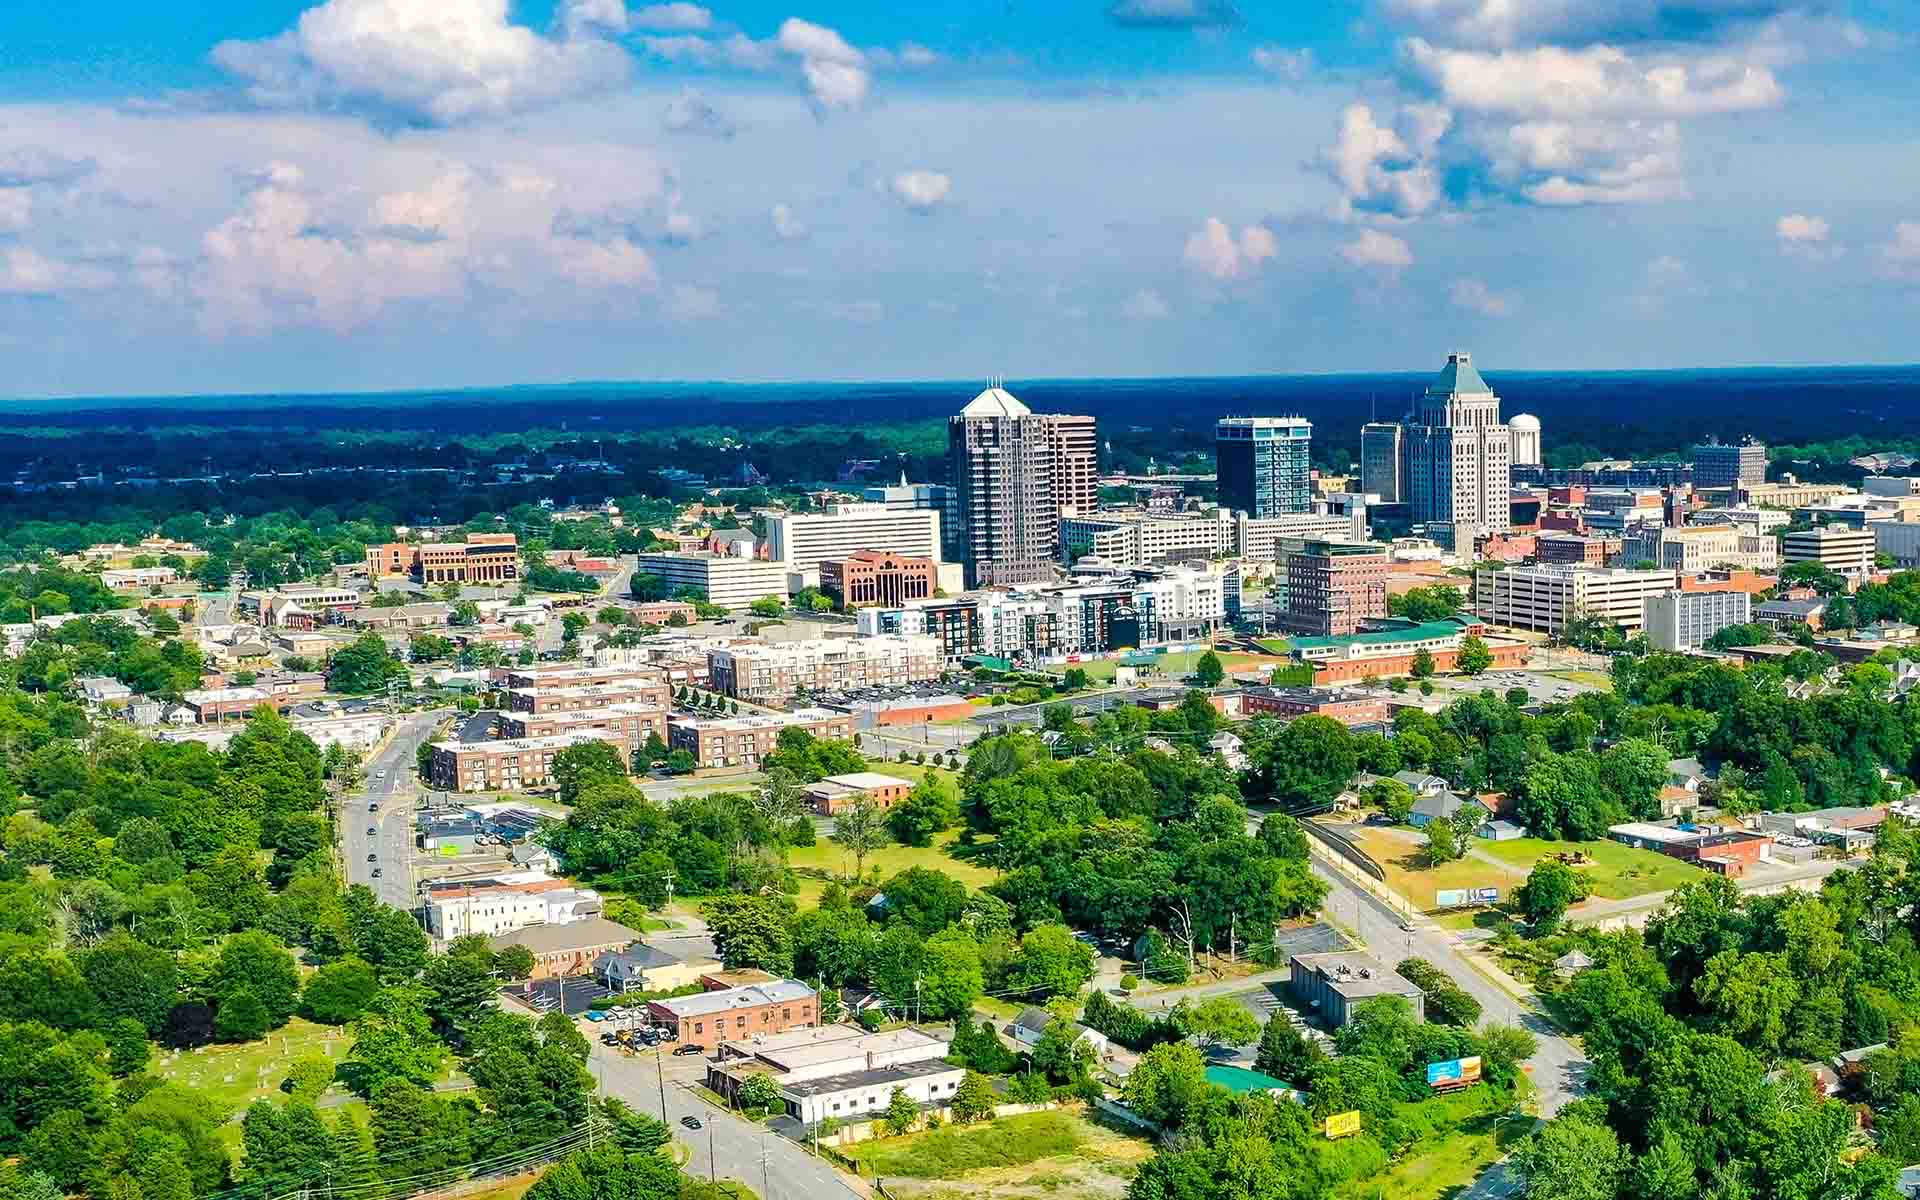 Contact - Aerial View of a City in North Carolina on a Beautiful Day